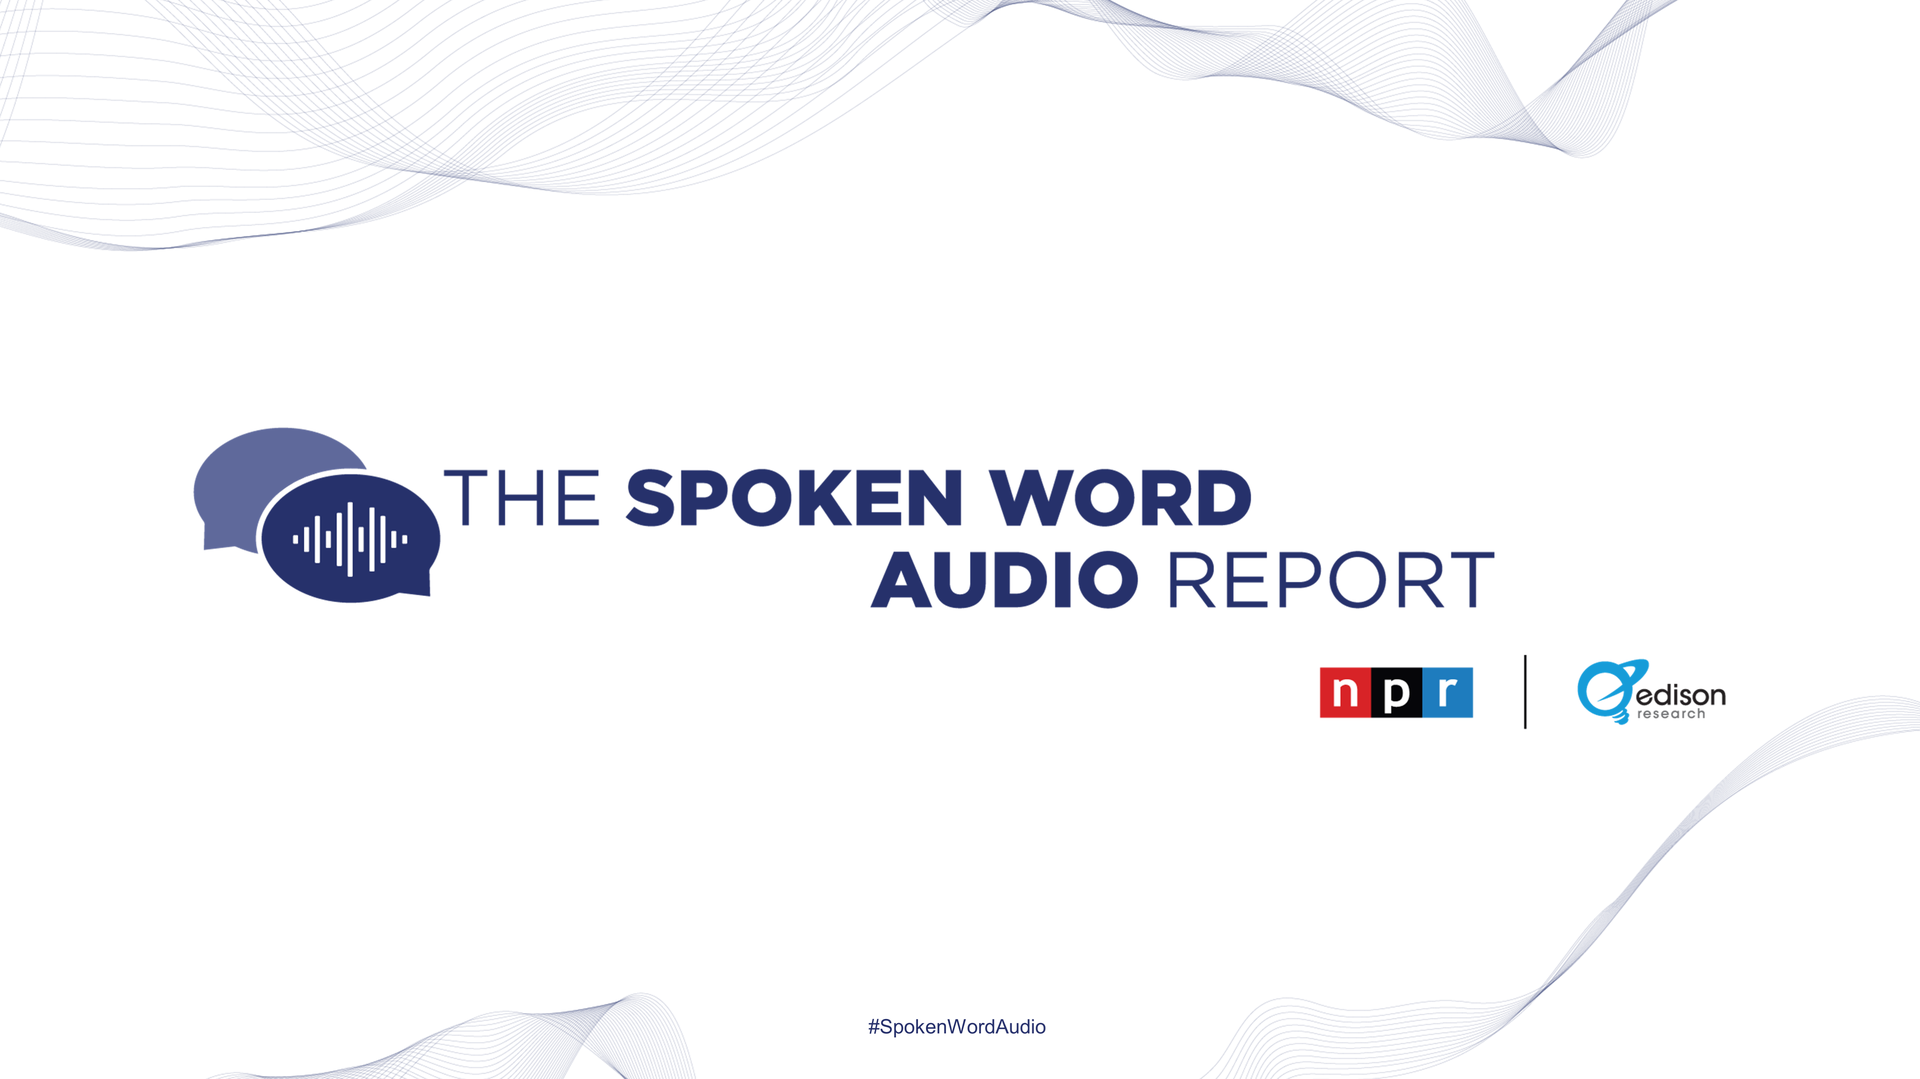 The Spoken Word Audio Report and NPR logo